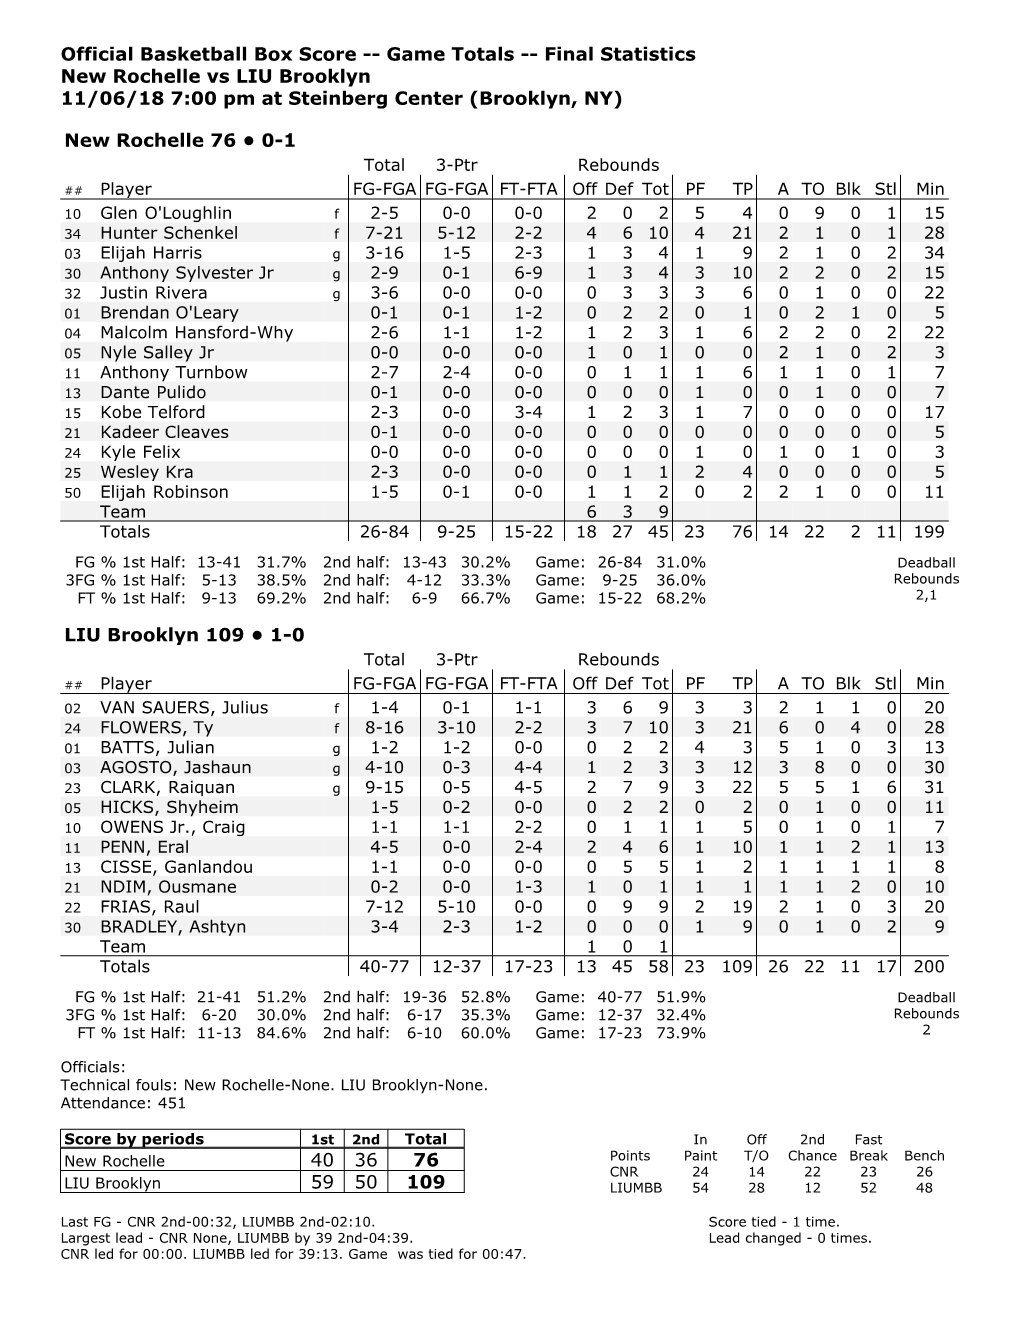 Official Basketball Box Score -- Game Totals -- Final Statistics New Rochelle Vs LIU Brooklyn 11/06/18 7:00 Pm at Steinberg Center (Brooklyn, NY)